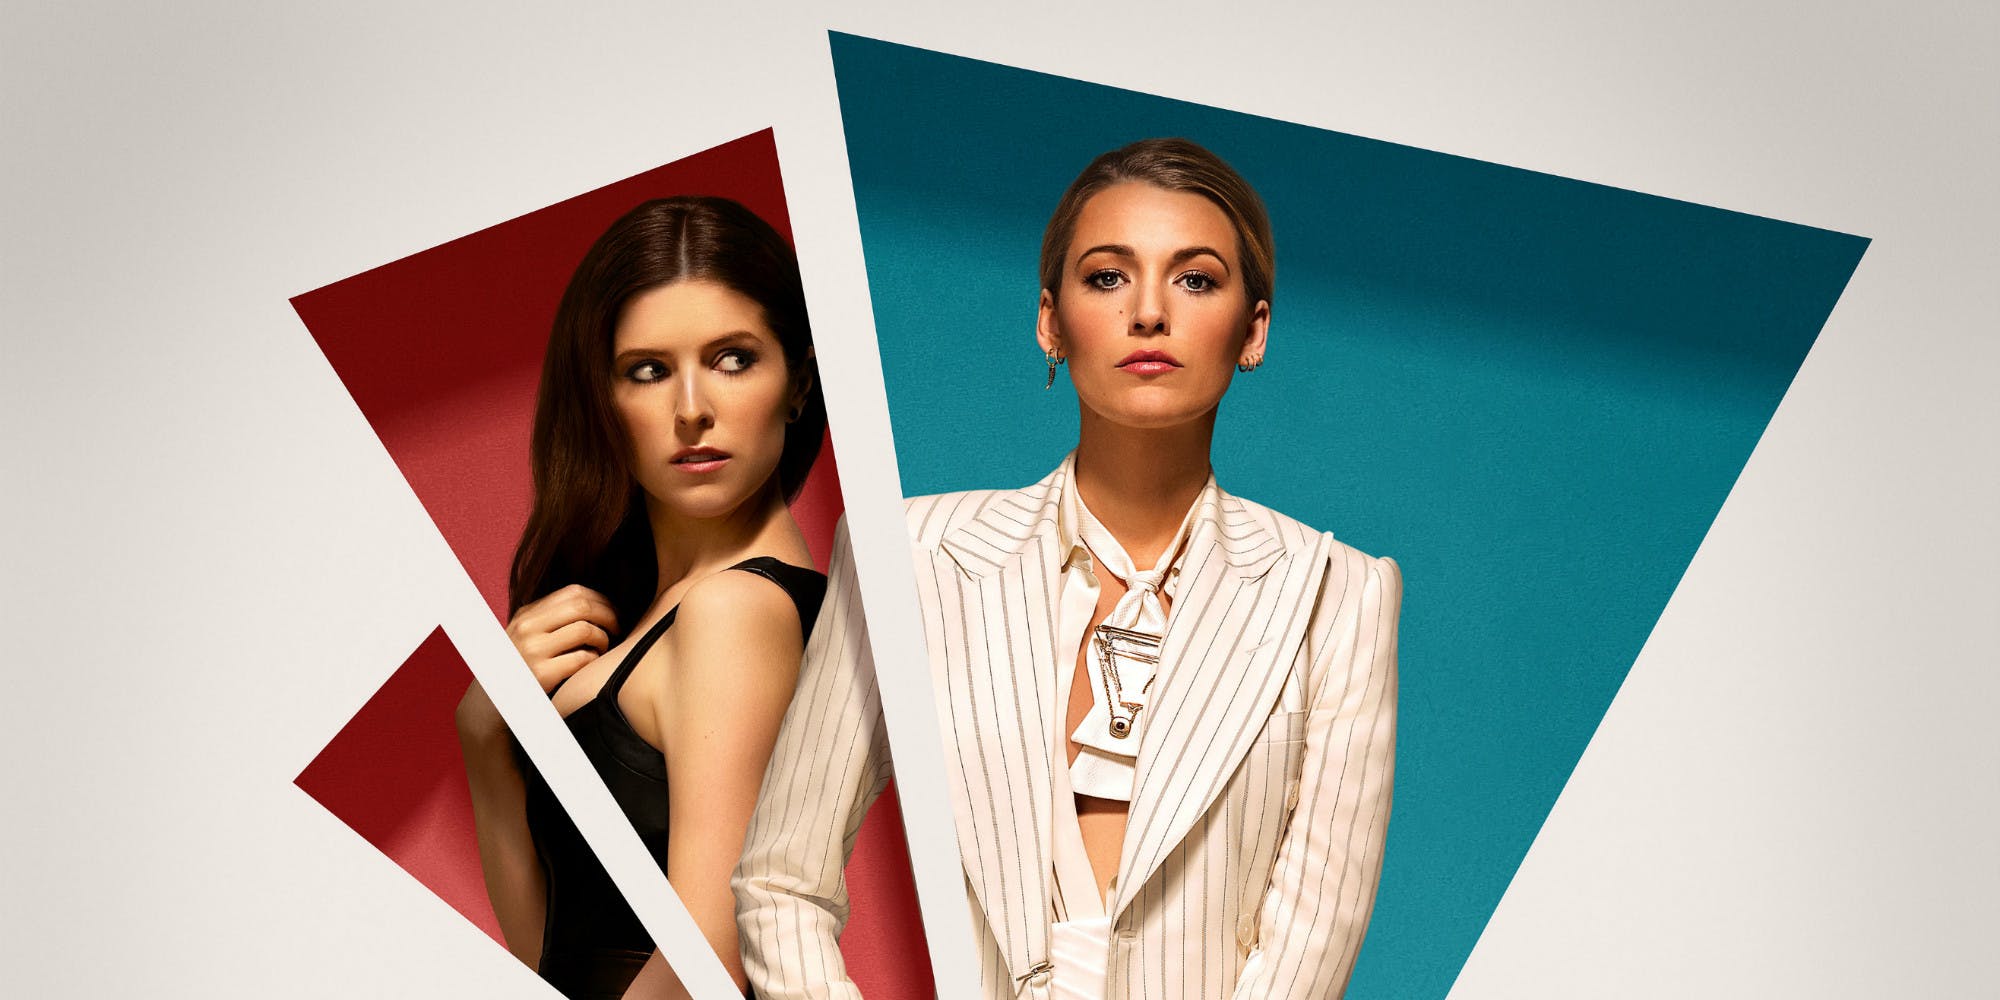 A Simple Favor review: Smart thriller filled with fantastic performances and witty dialogue